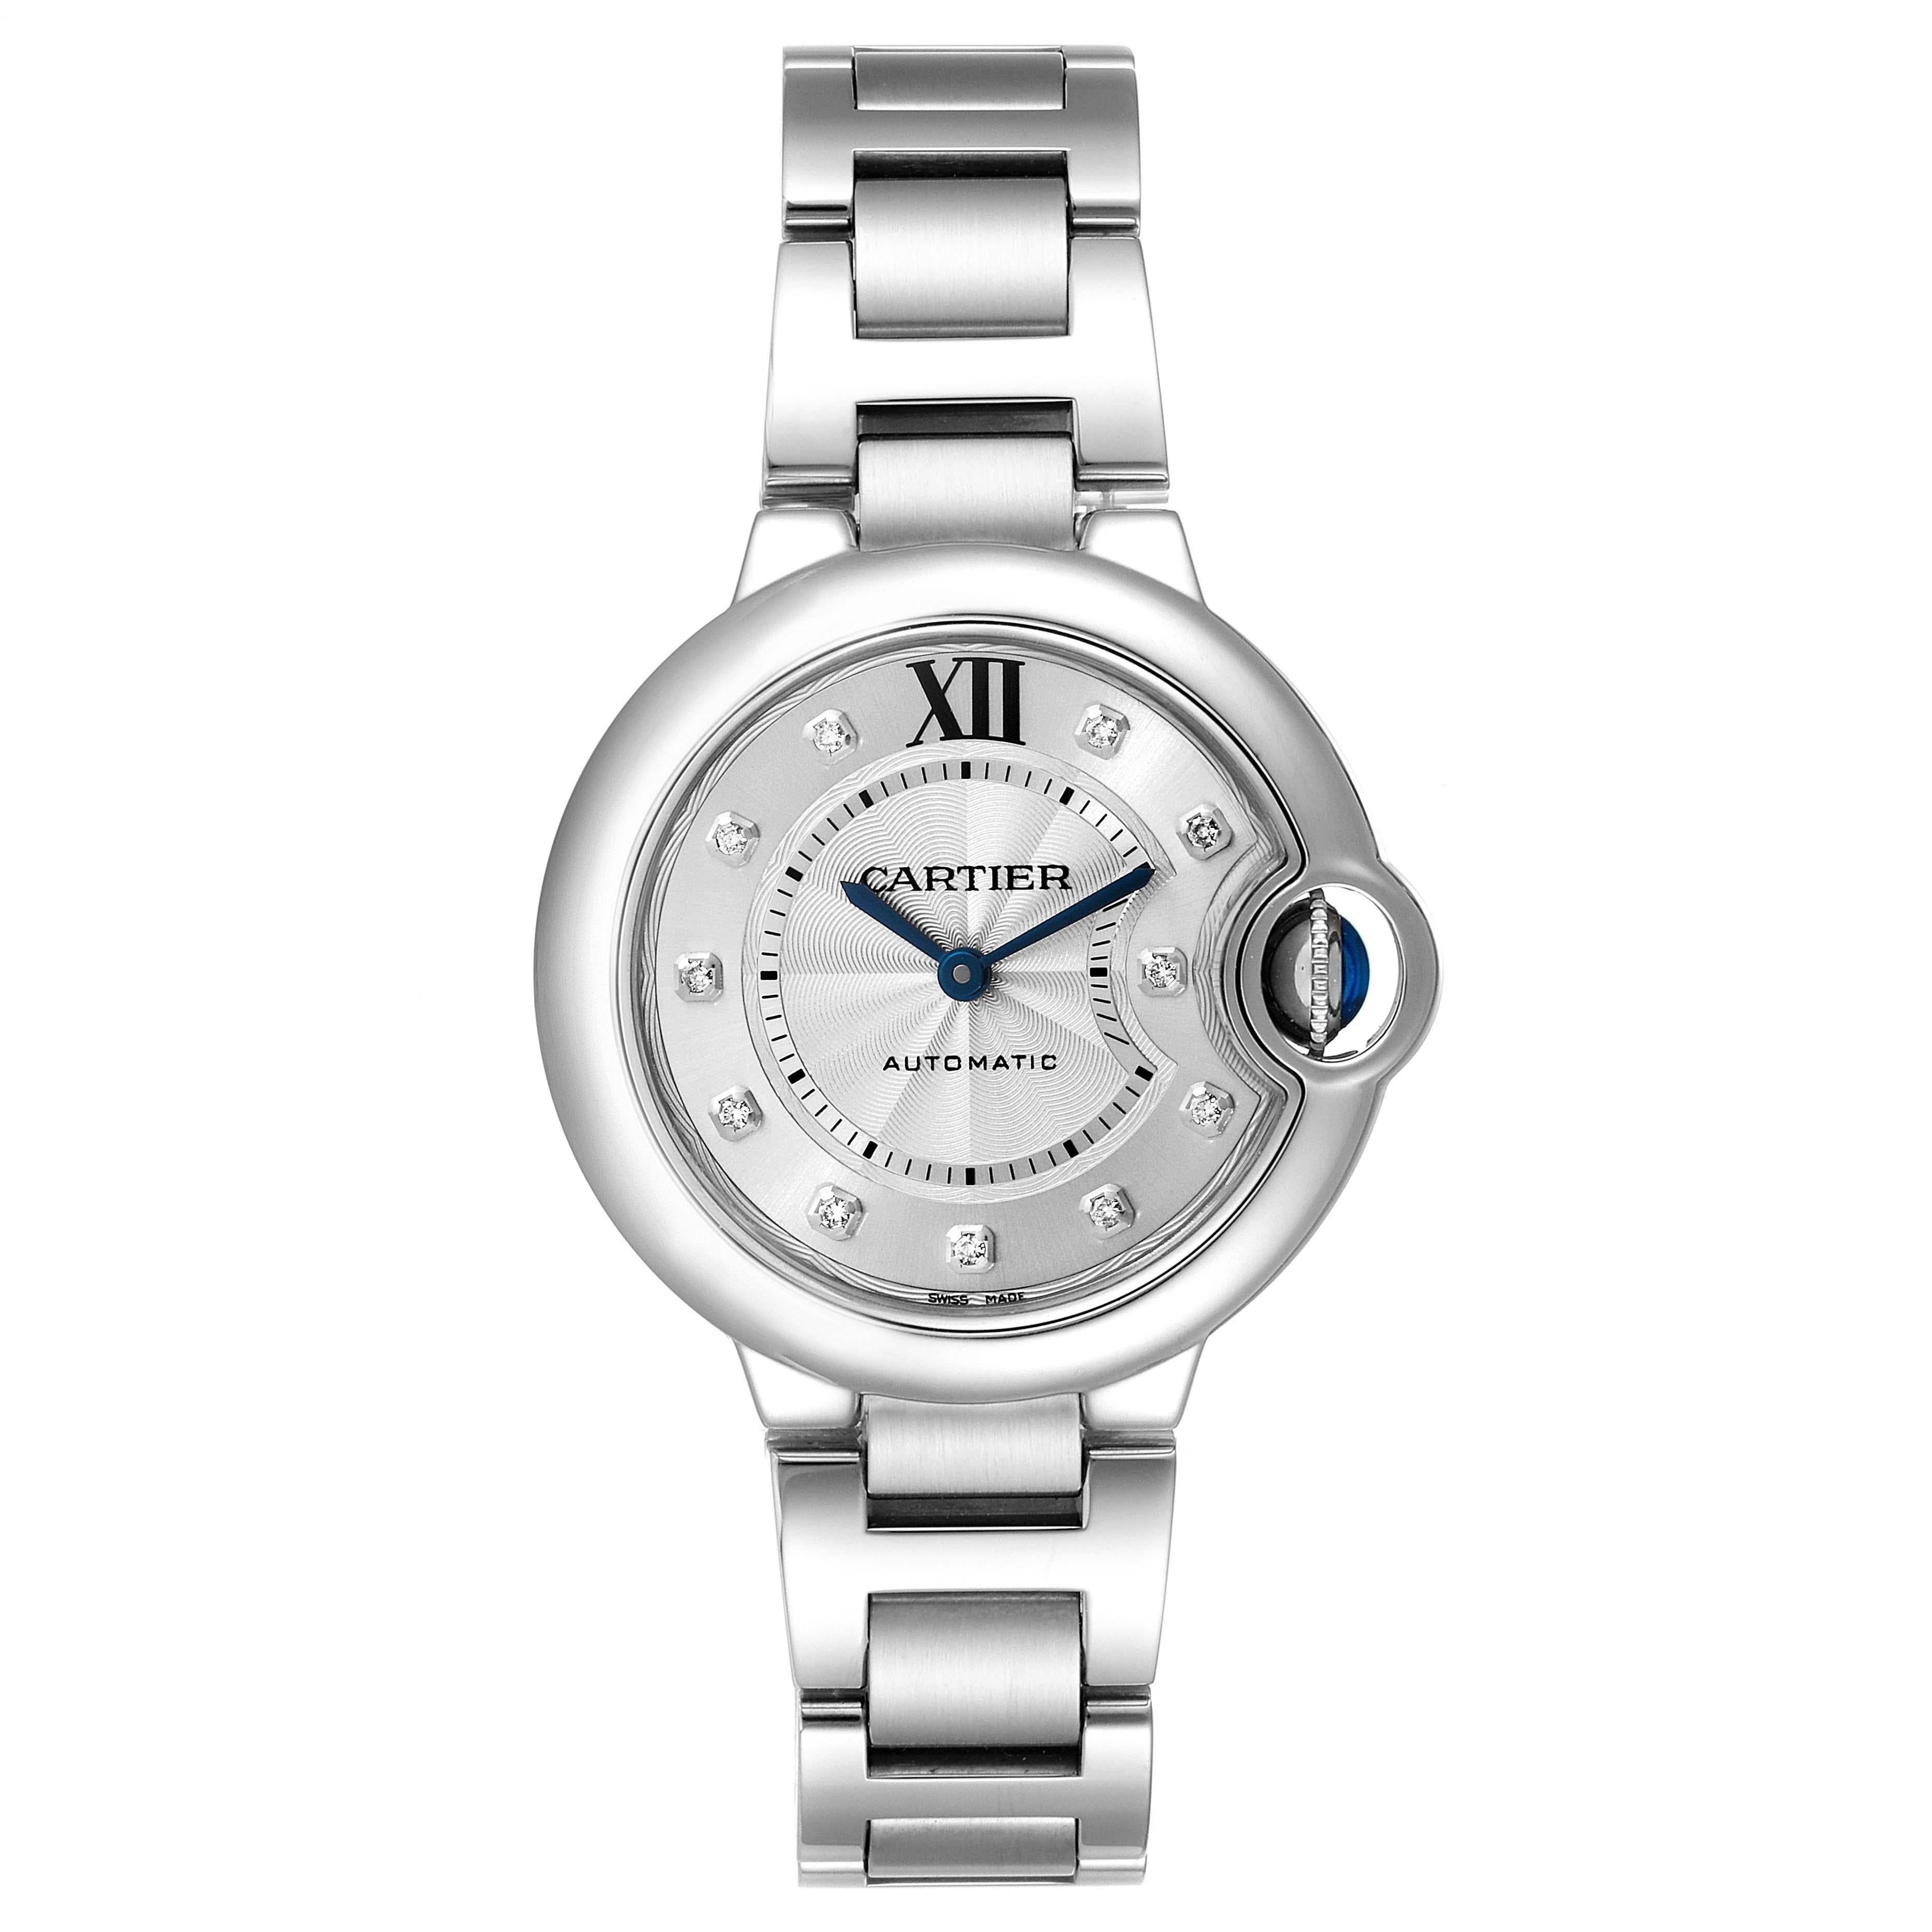 Cartier Ballon Bleu 33mm Automatic Diamond Steel Watch WE902074 Box Papers. Automatic self-winding movement. Caliber 076. Round stainless steel case 33 mm in diameter. Fluted crown set with the blue spinel cabochon. Stainless steel smooth bezel.